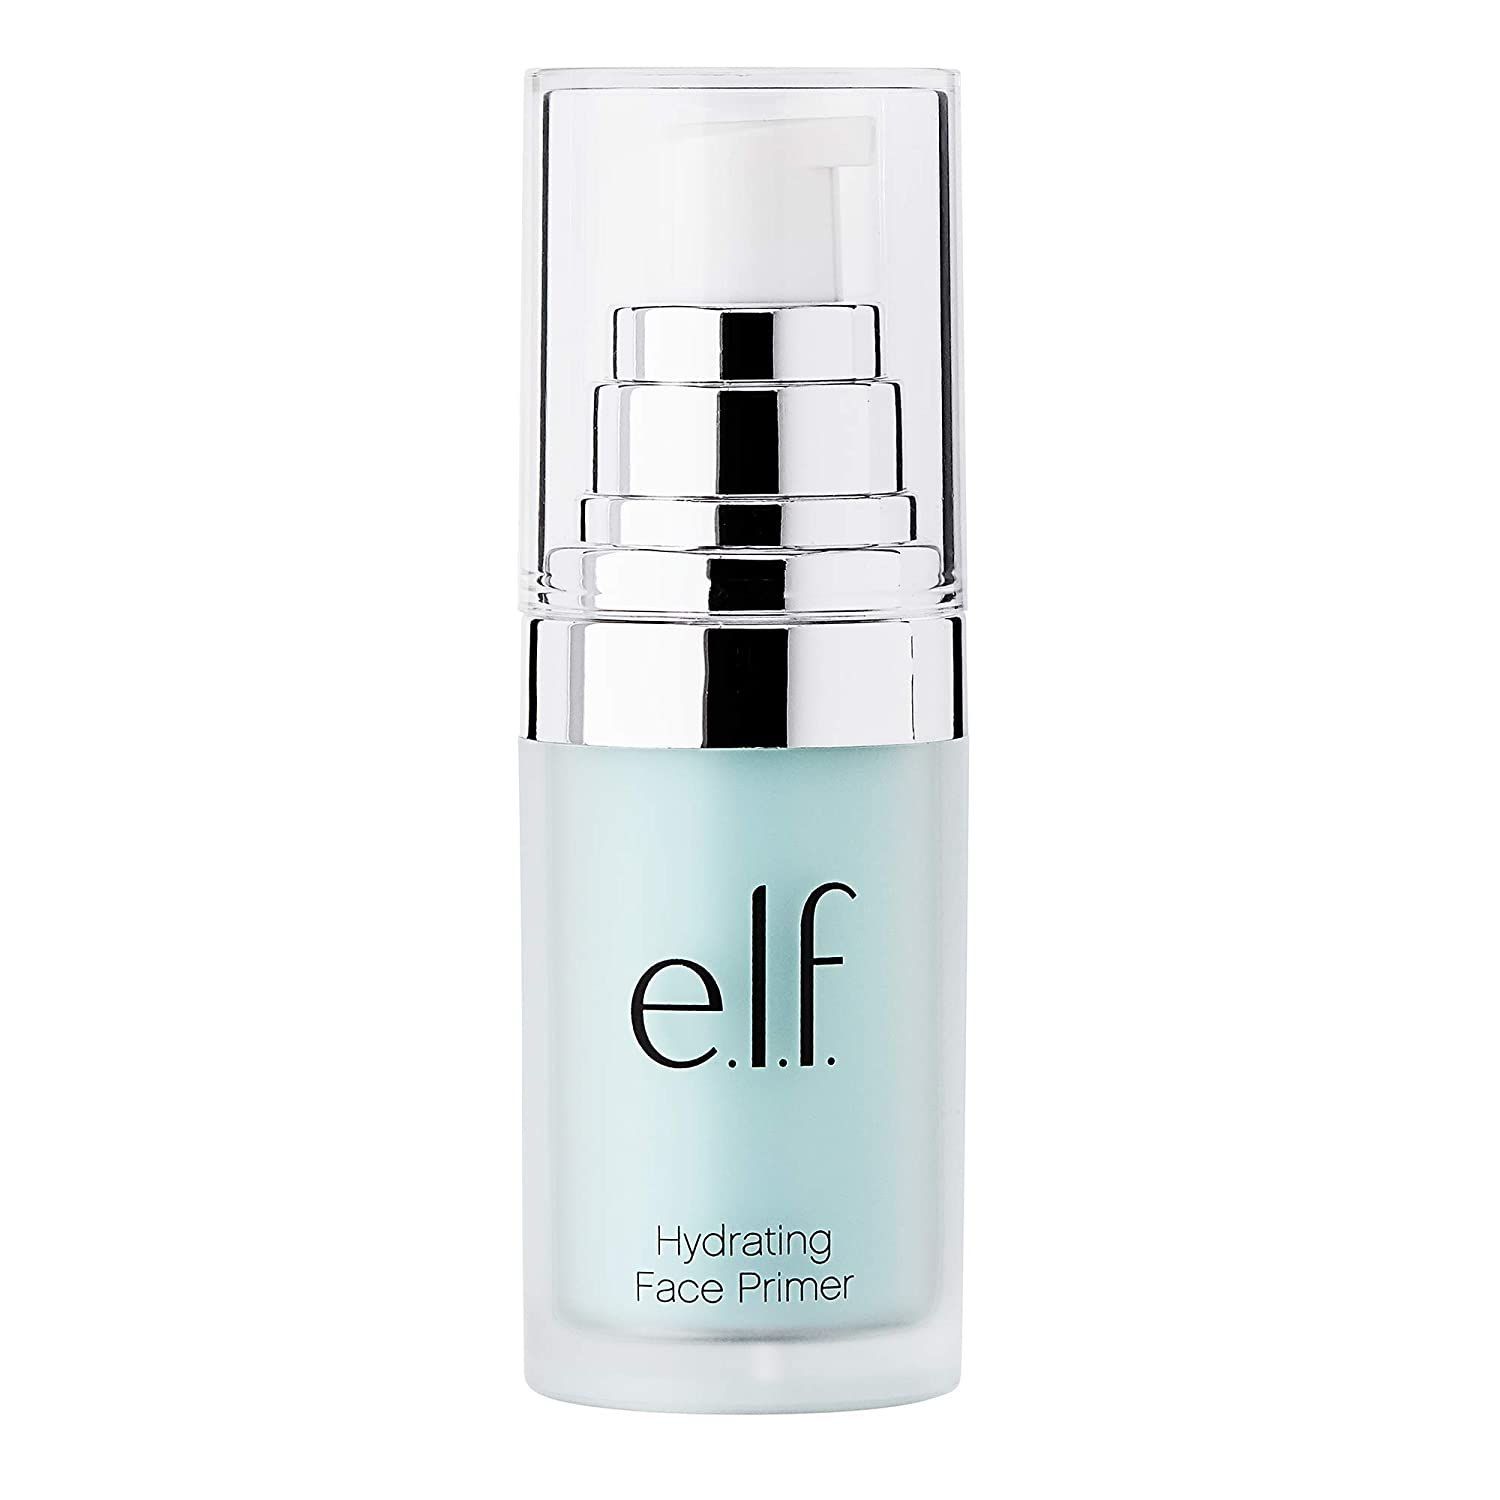 15 Best Primers For Dry Skin 2022 - Top Hydrating Makeup Primers